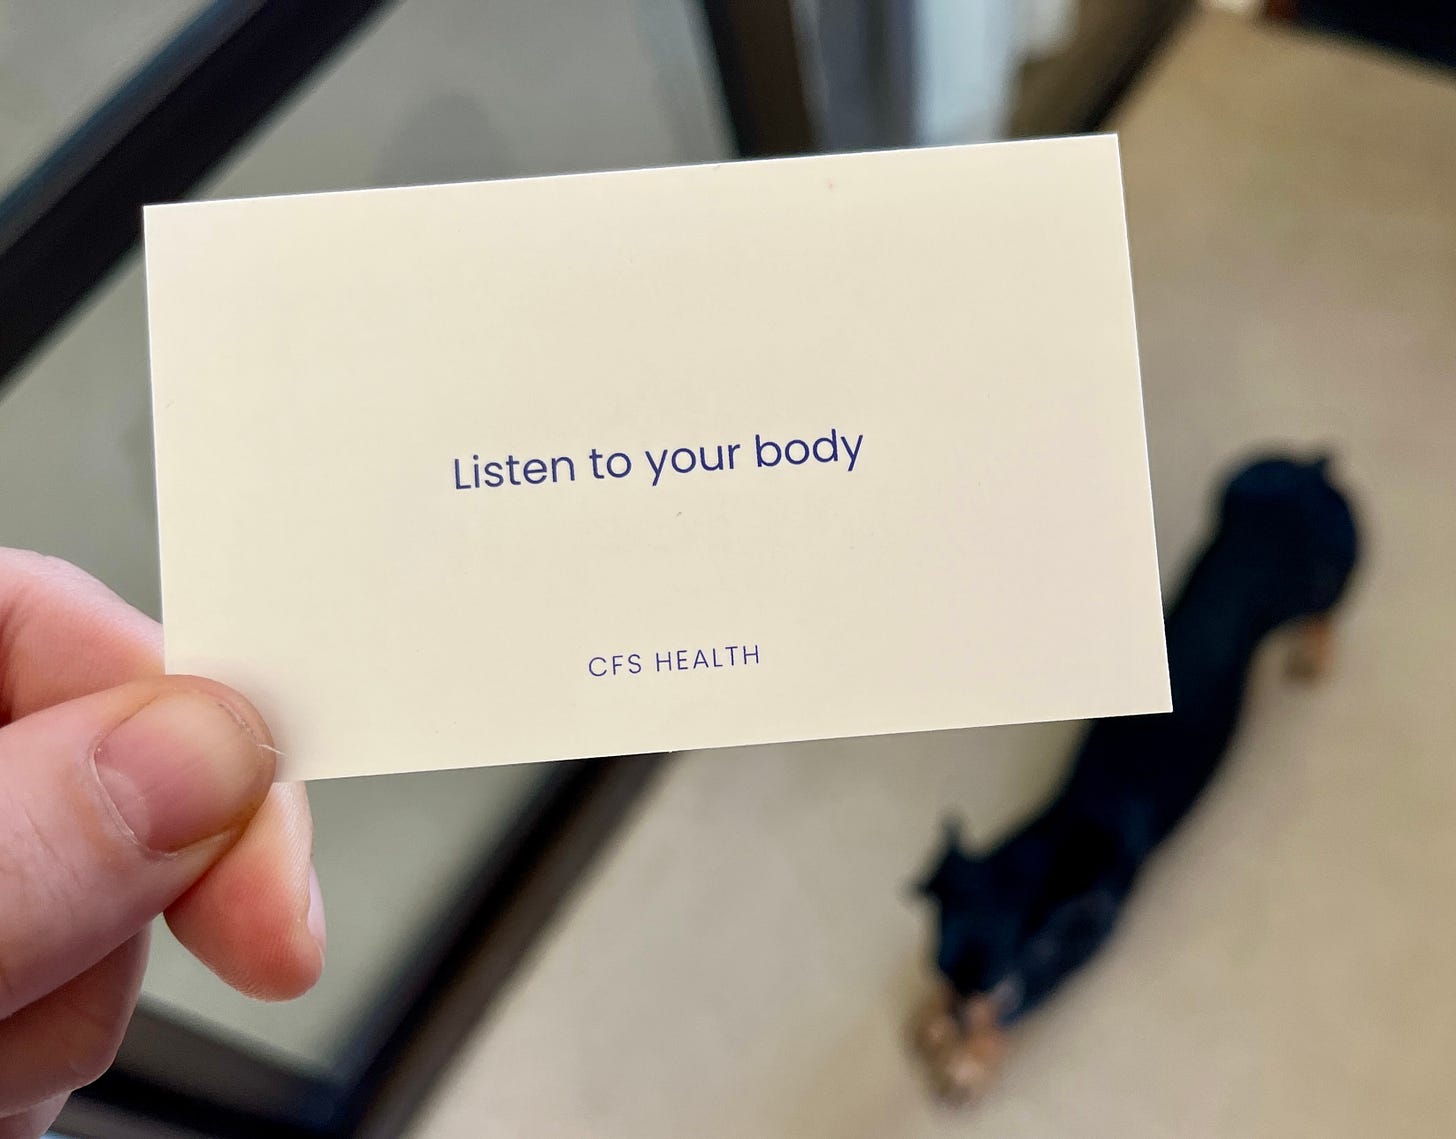 in the foreground a hand holds a card that reads  "listen to your body" with a logo that reads "CFS health". In the blurry background a black dachshund does a stretch.